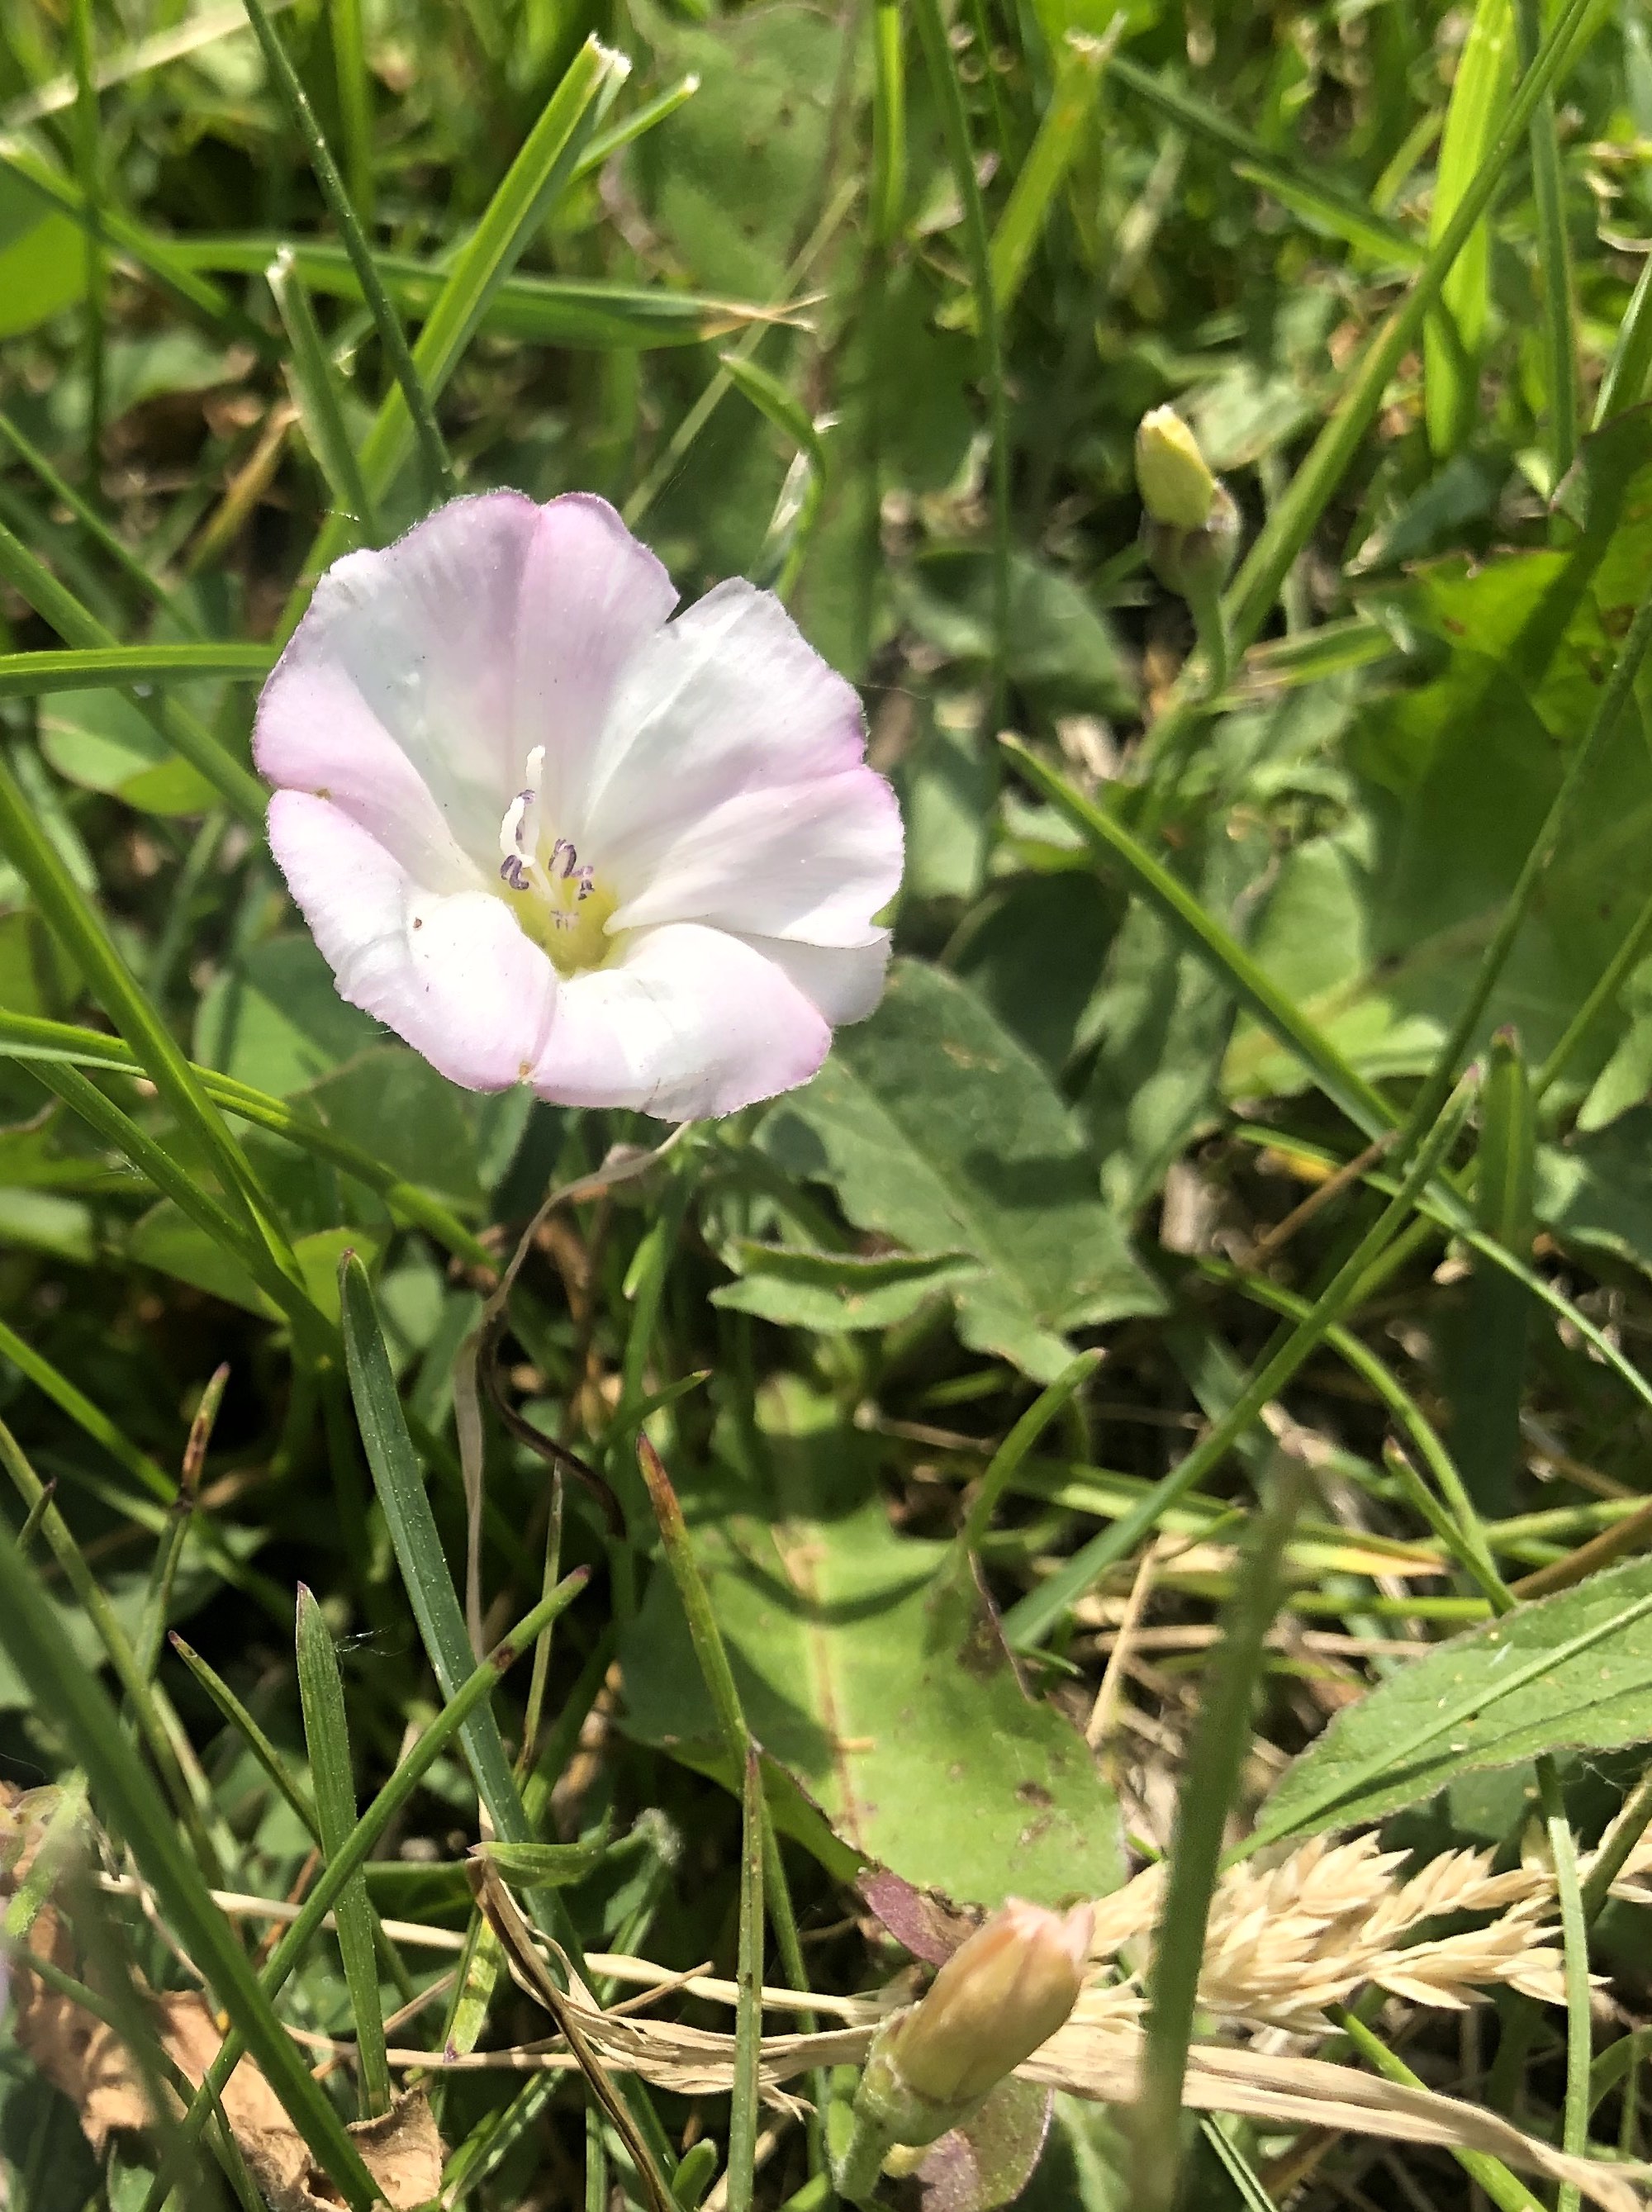 Field Bindweed by UW Arbortetum service road by Visitors Center in Madison, Wisconsin on June 2, 2021.